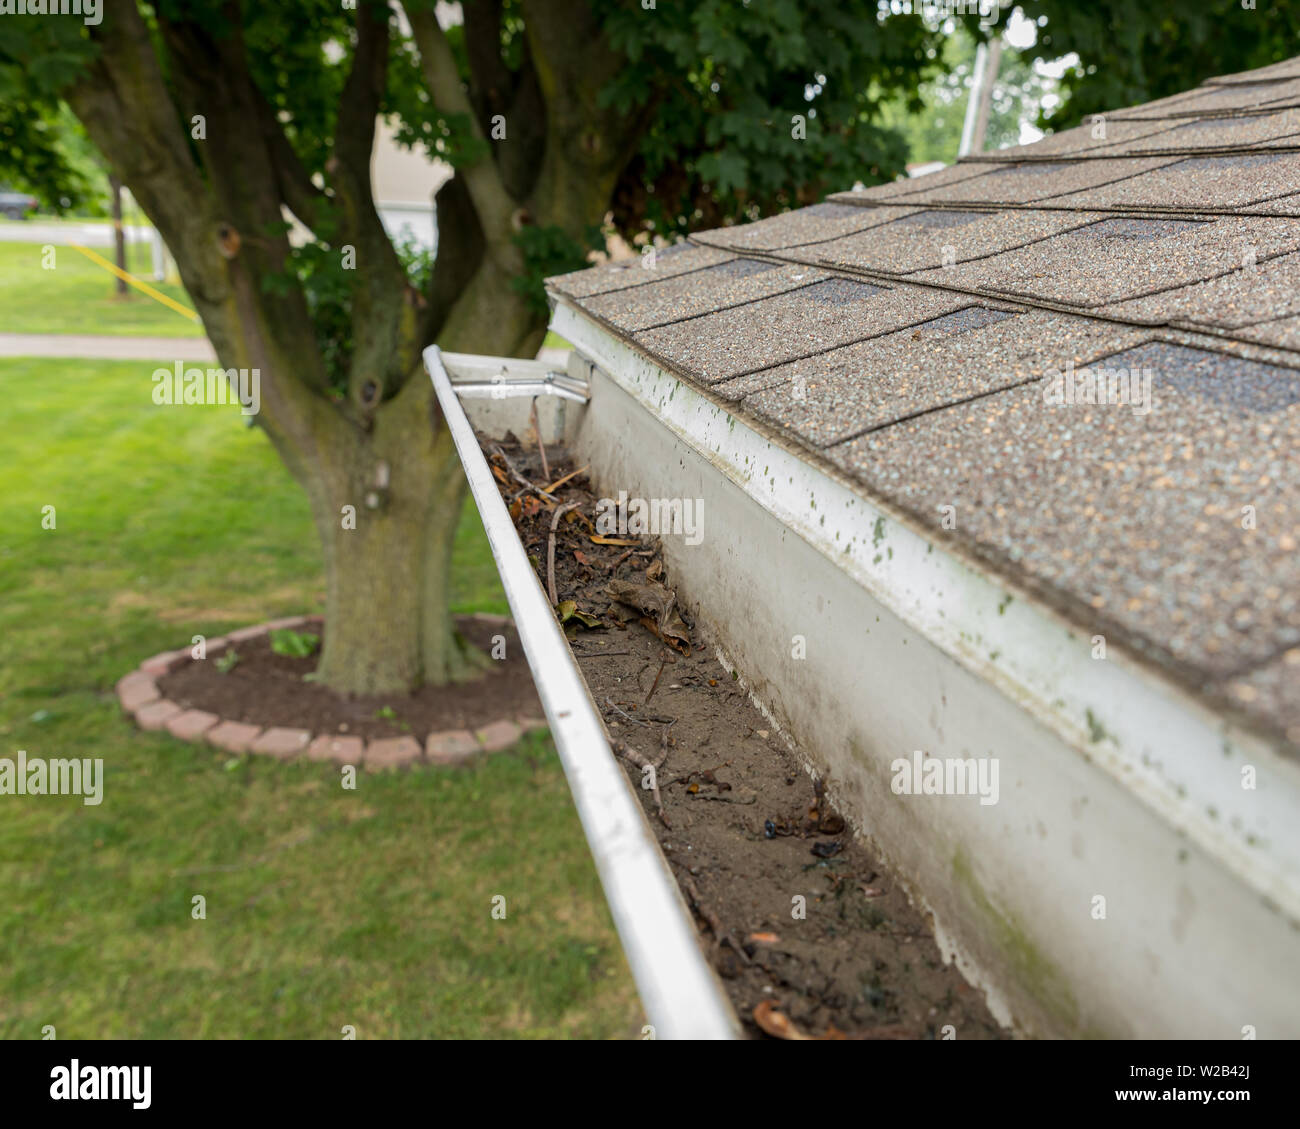 House gutter clogged with tree leaves, sticks, and debris . Tree sapling growing in the mold and mildew covered gutter Stock Photo